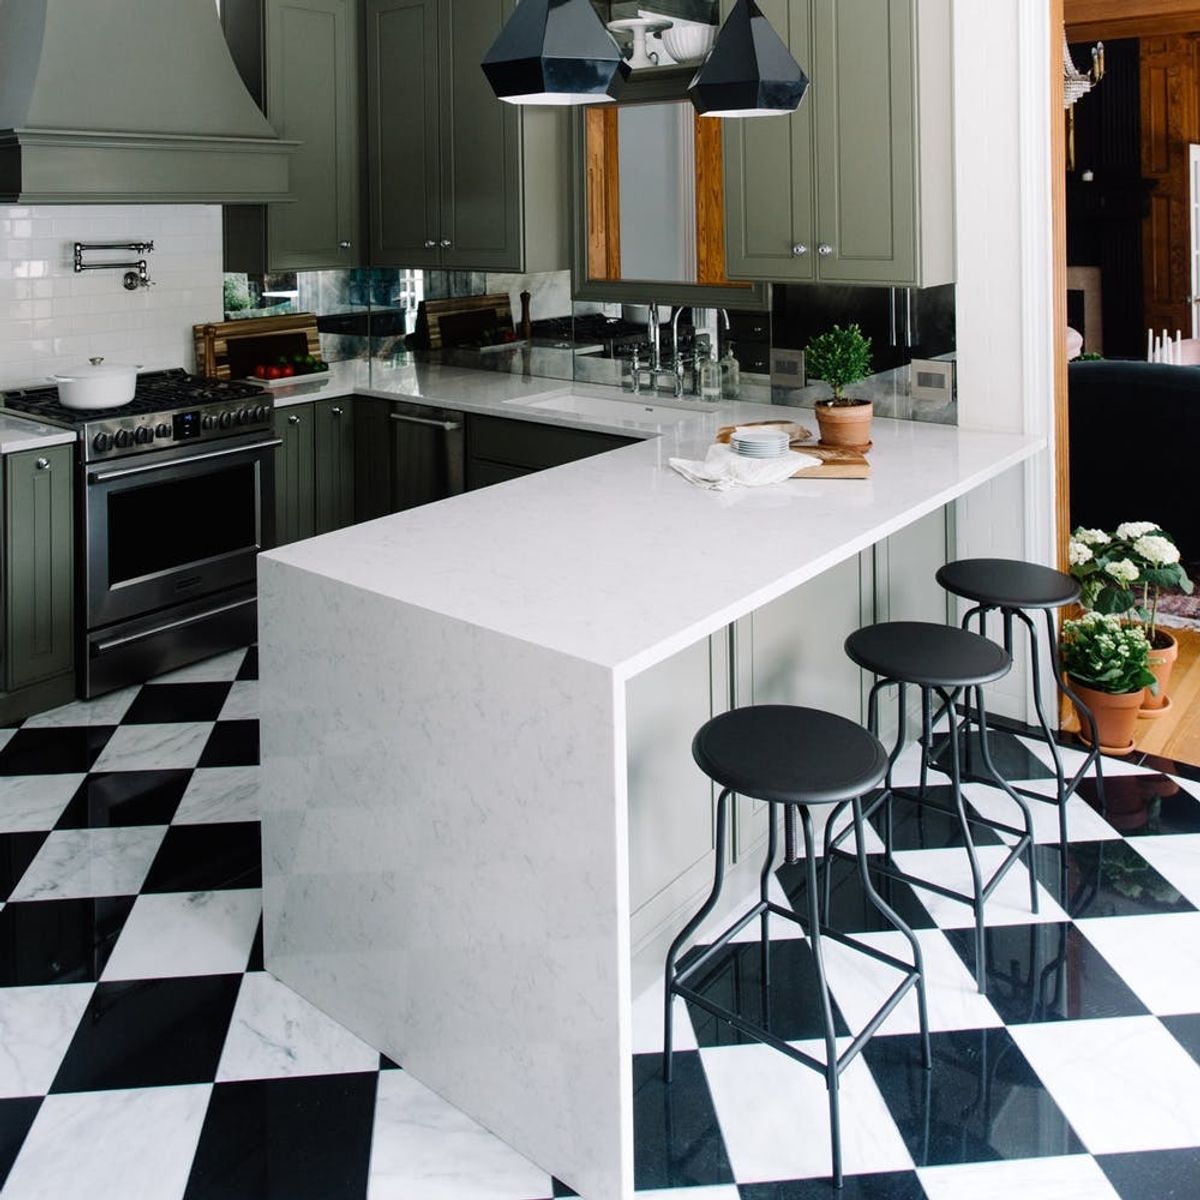 This Blogger’s Affordable Modern Kitchen Makeover Is All Kinds of Cool